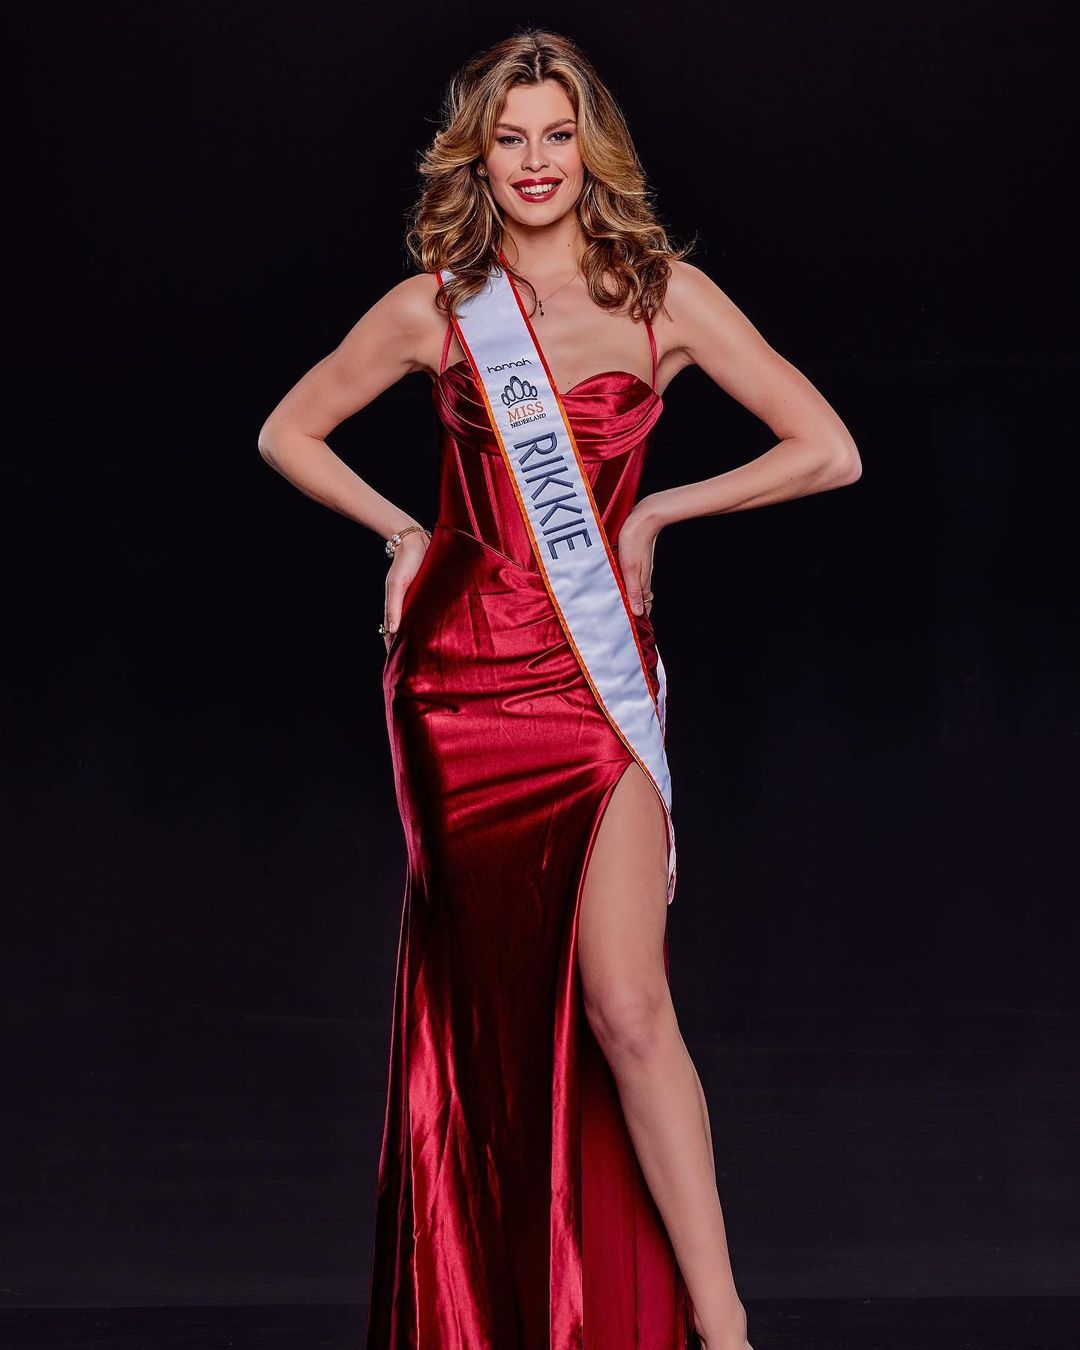 Rikkie Kolle, the first trans woman Miss Netherlands, is seen wearing a read dress and a sash bearing her name.